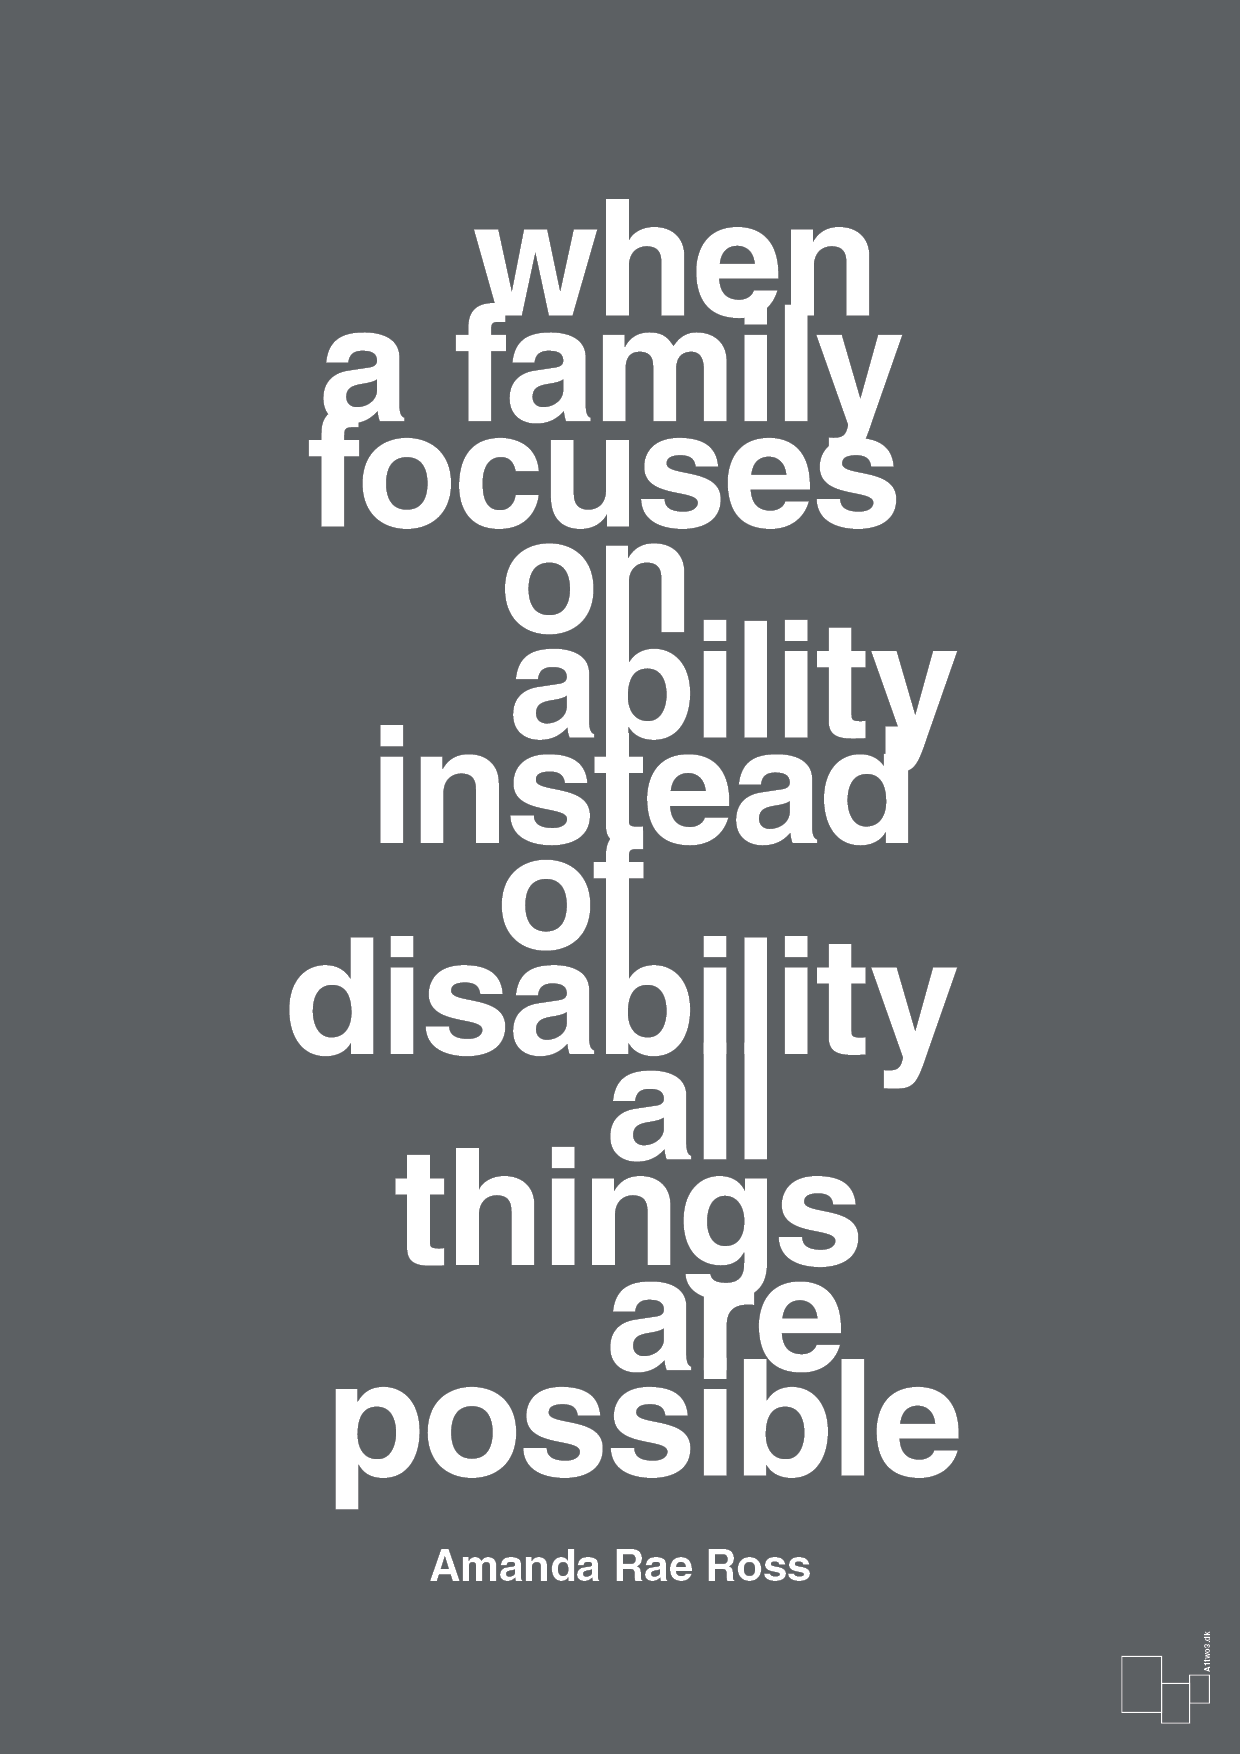 when a family focuses on ability instead of disability all things are possible - Plakat med Samfund i Graphic Charcoal